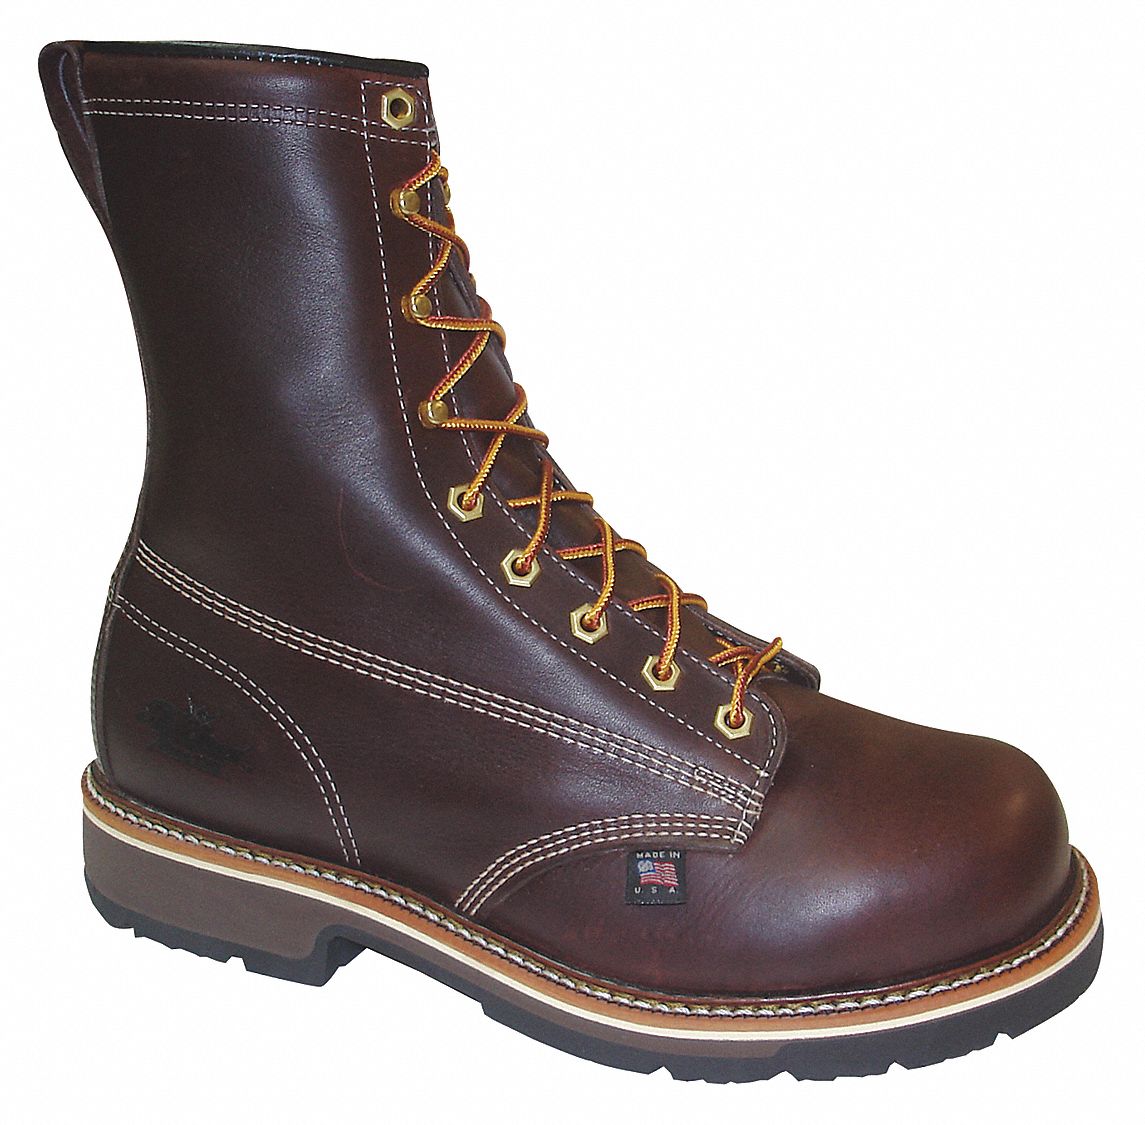 THOROGOOD SHOES Work Boots, 9, D, Brown, Composite, PR - 35MY04|804 ...